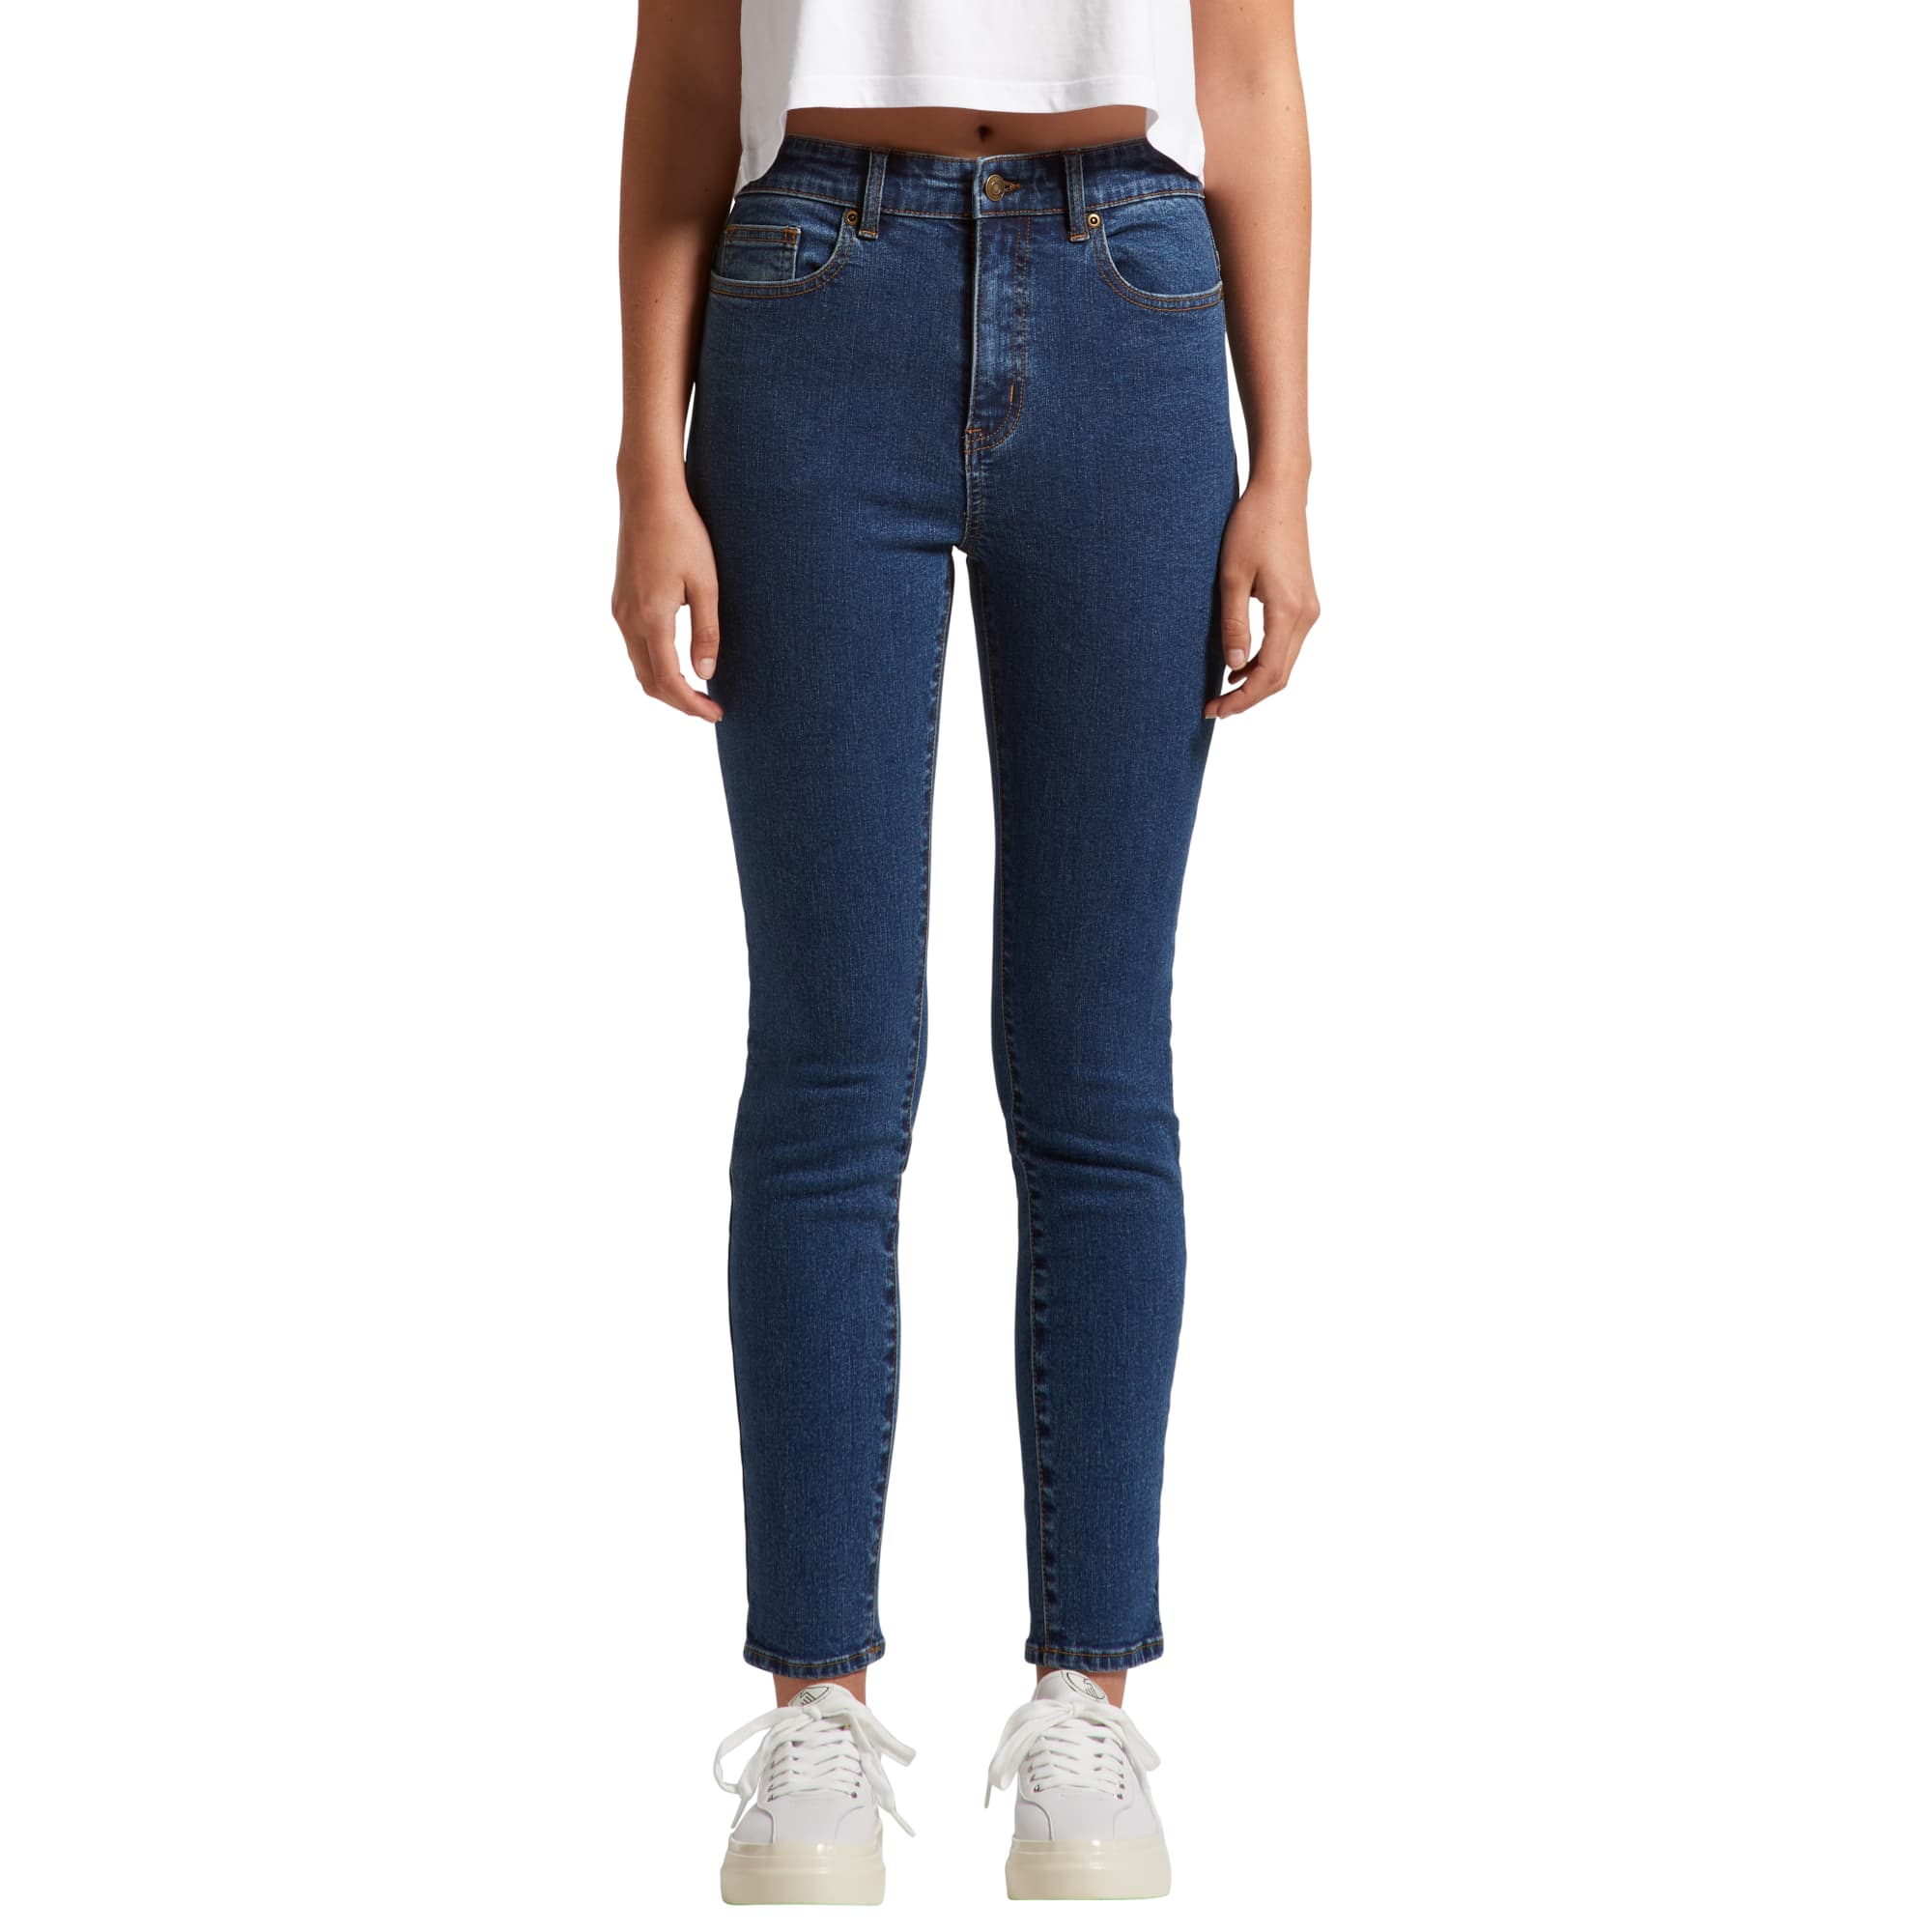 4800_wos_skinny_jeans_front.jpg